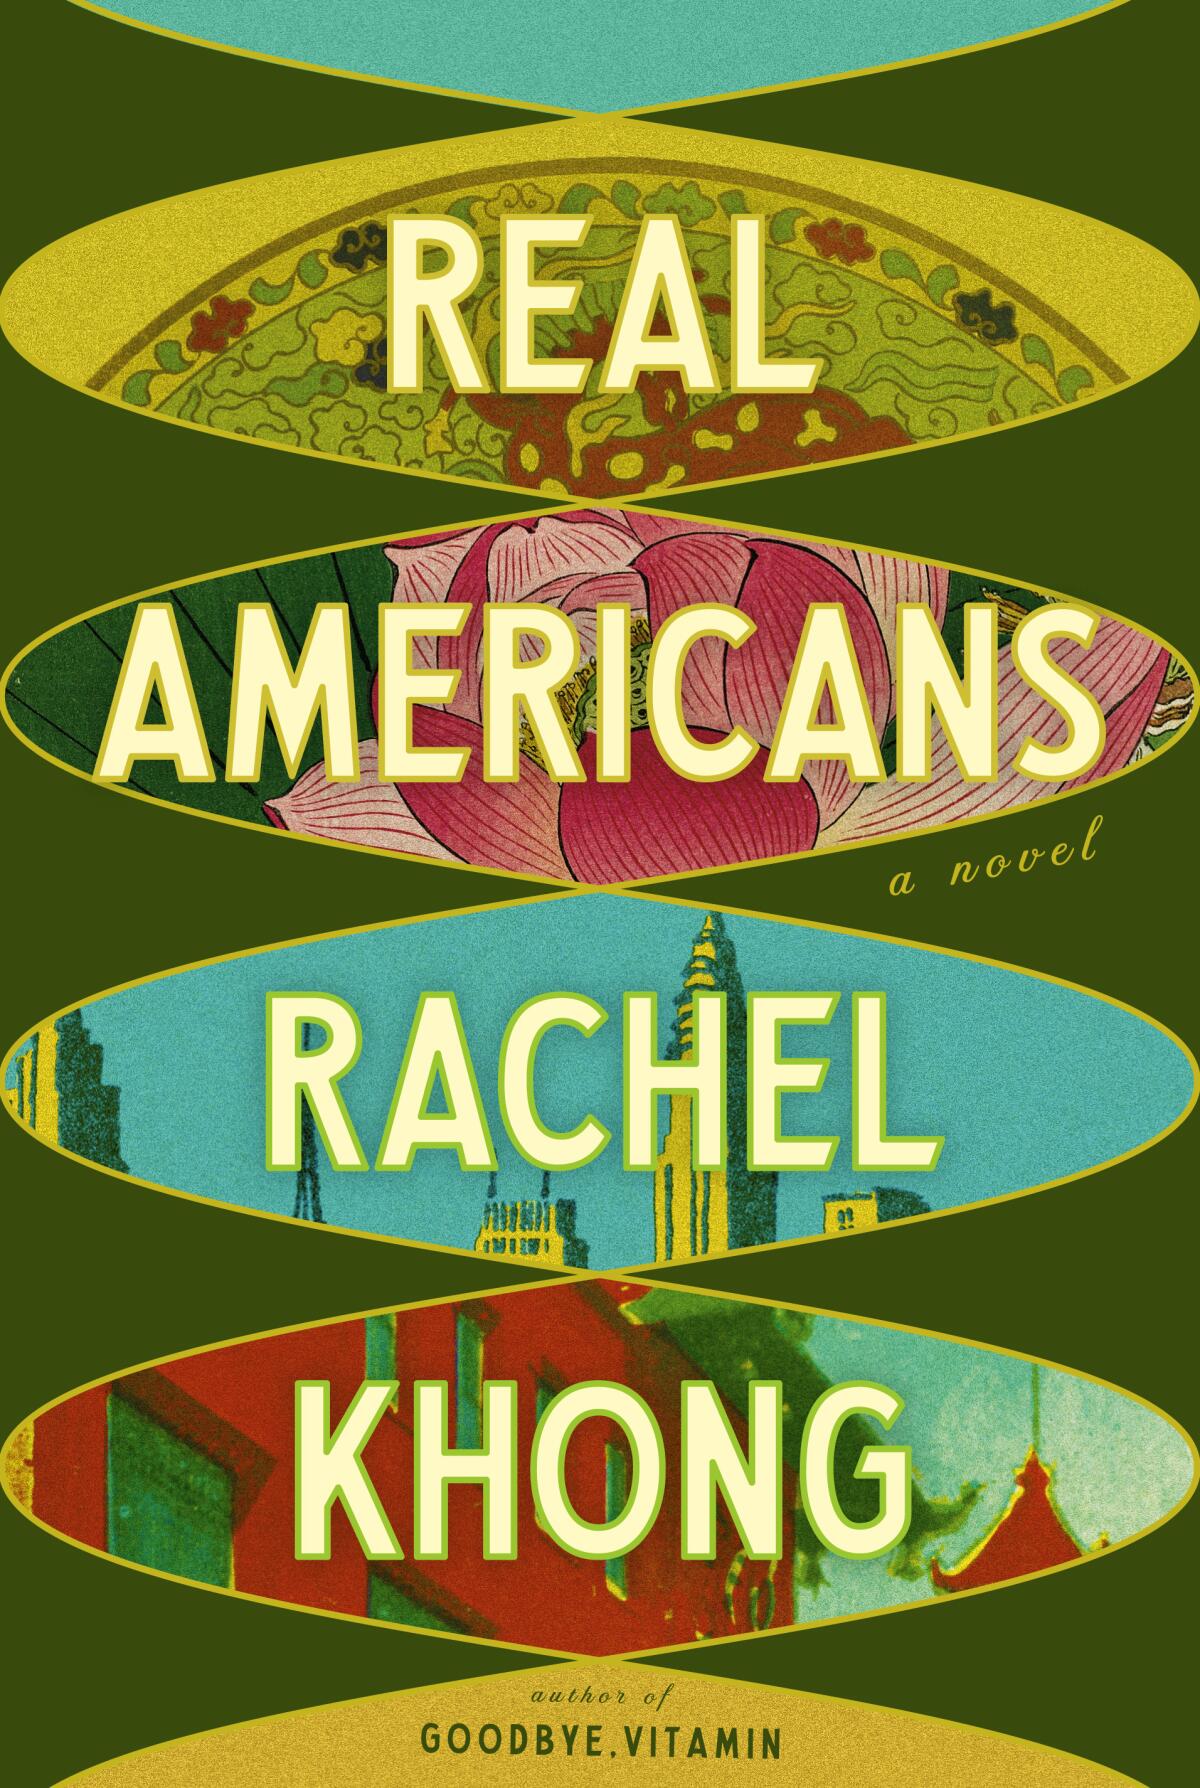 Book jacket for 'Real Americans' by Rachel Khong